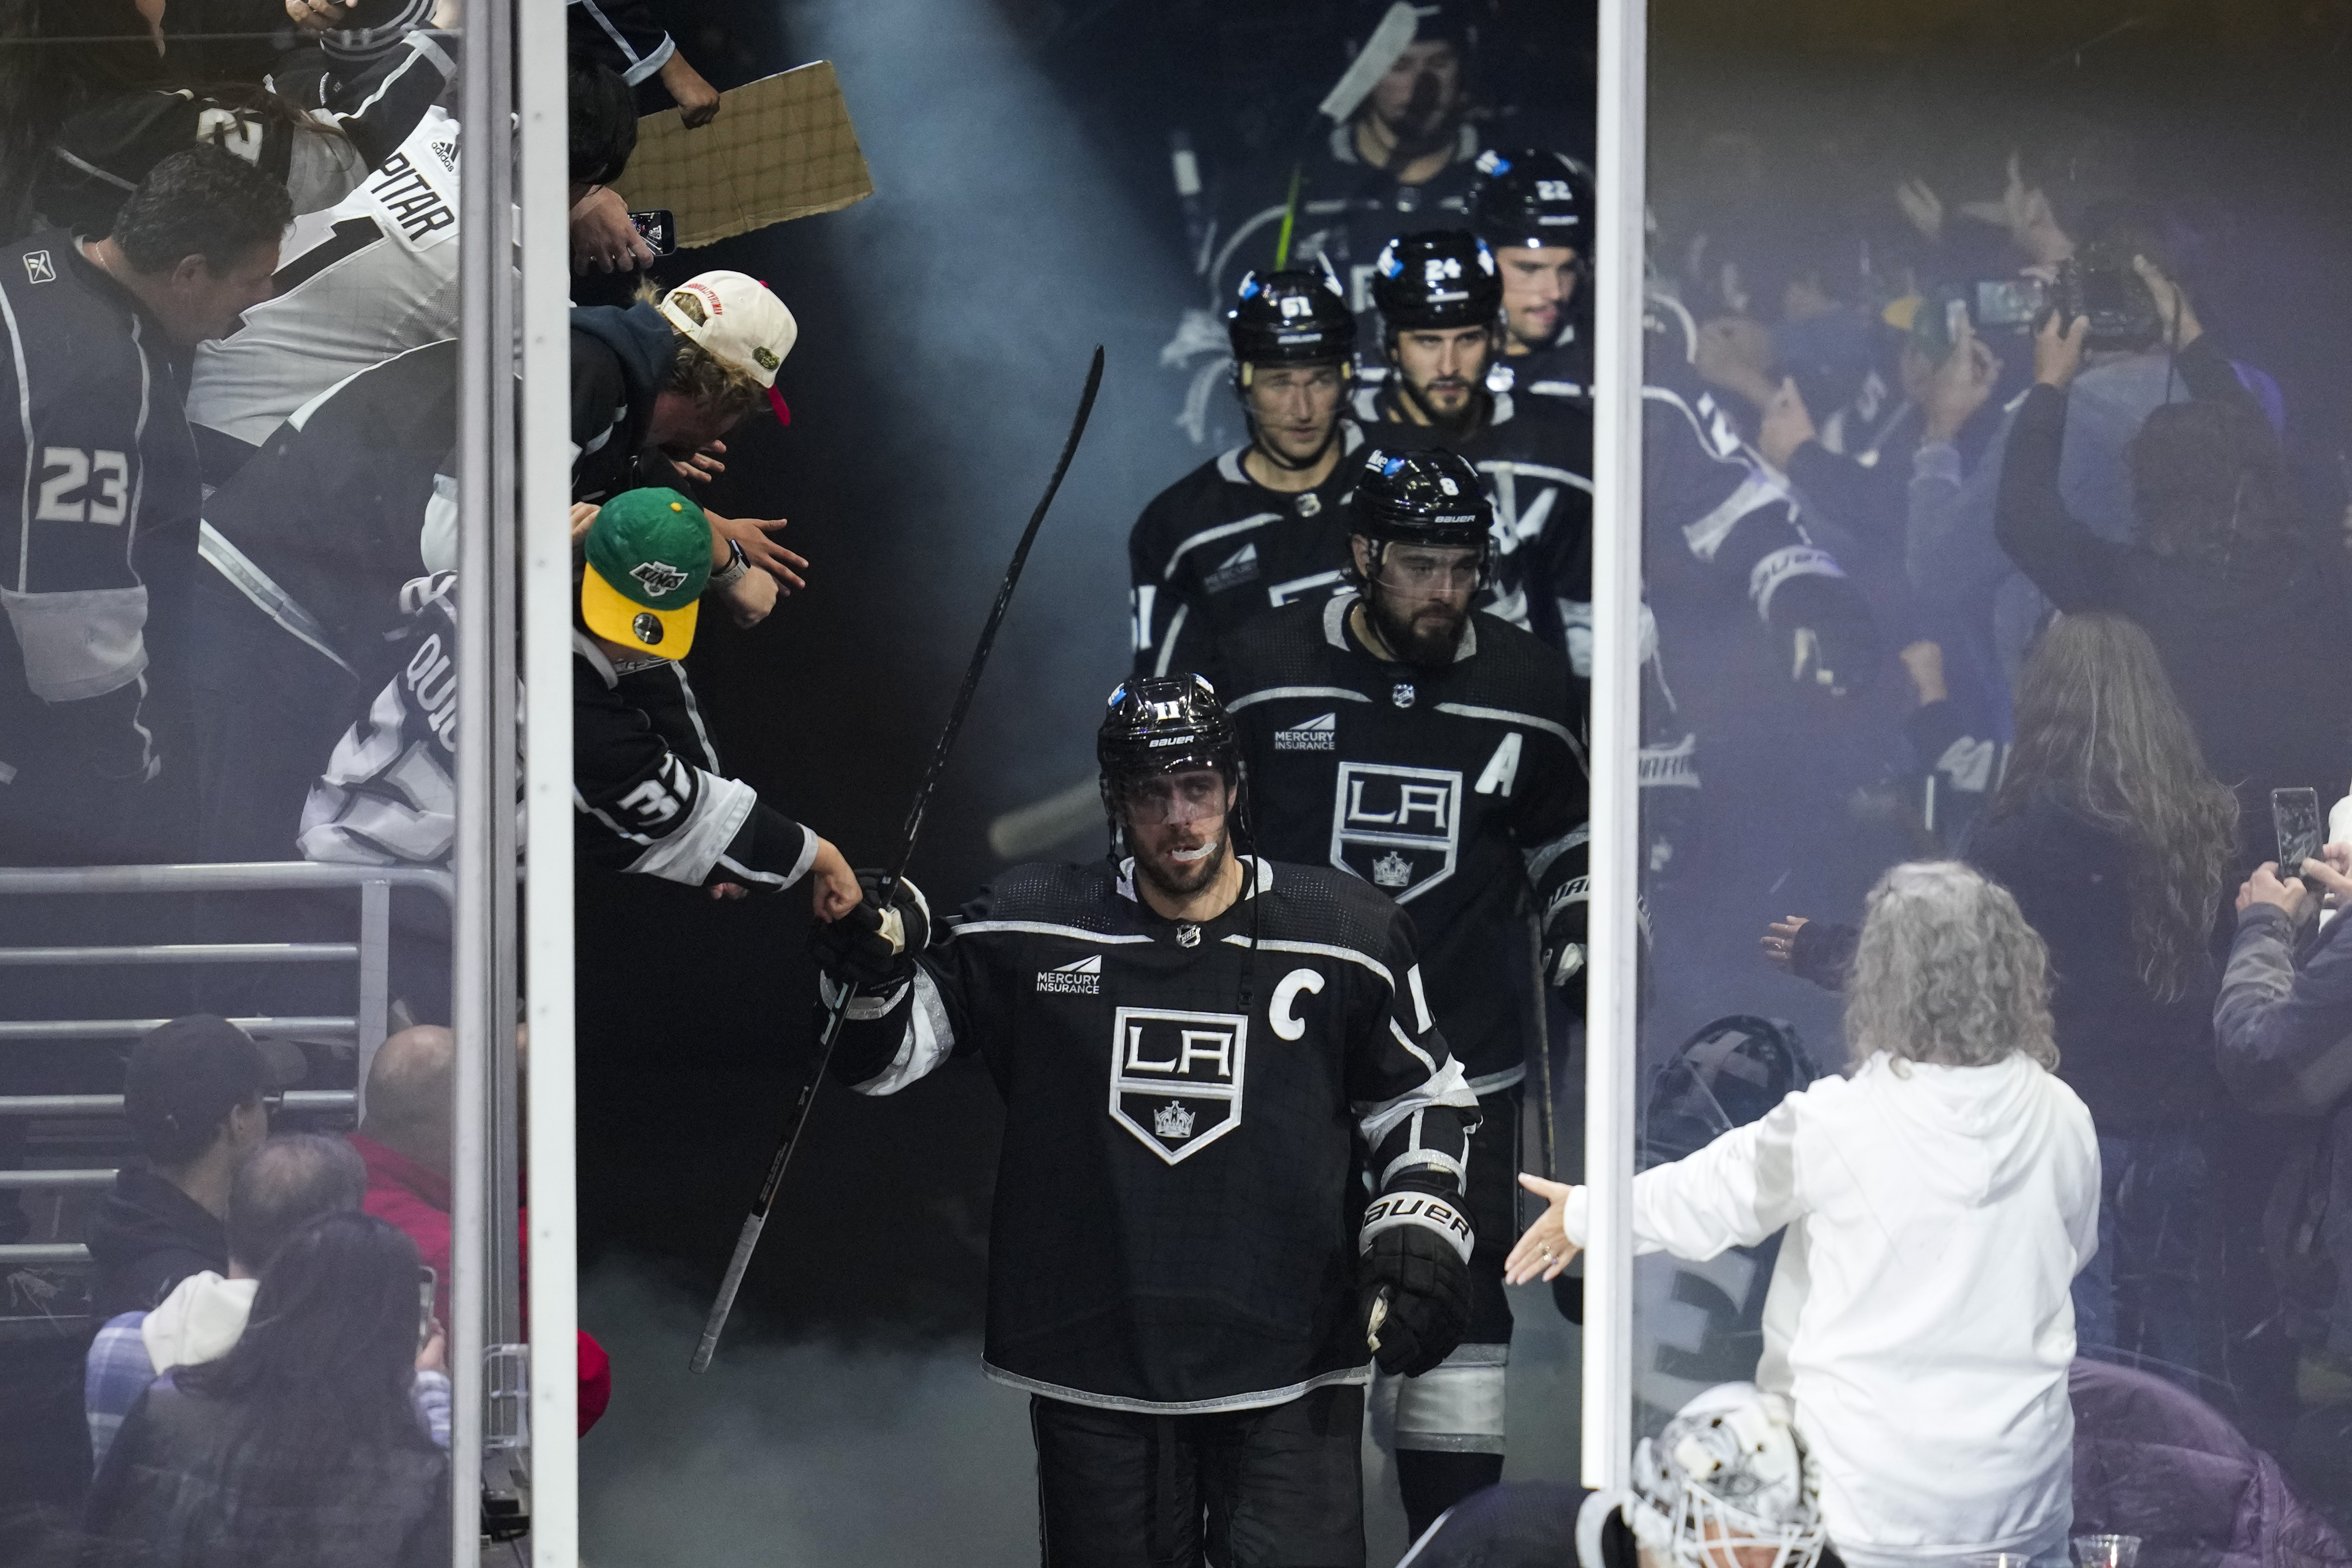 Kopitar celebrates Stanley Cup victory with family 